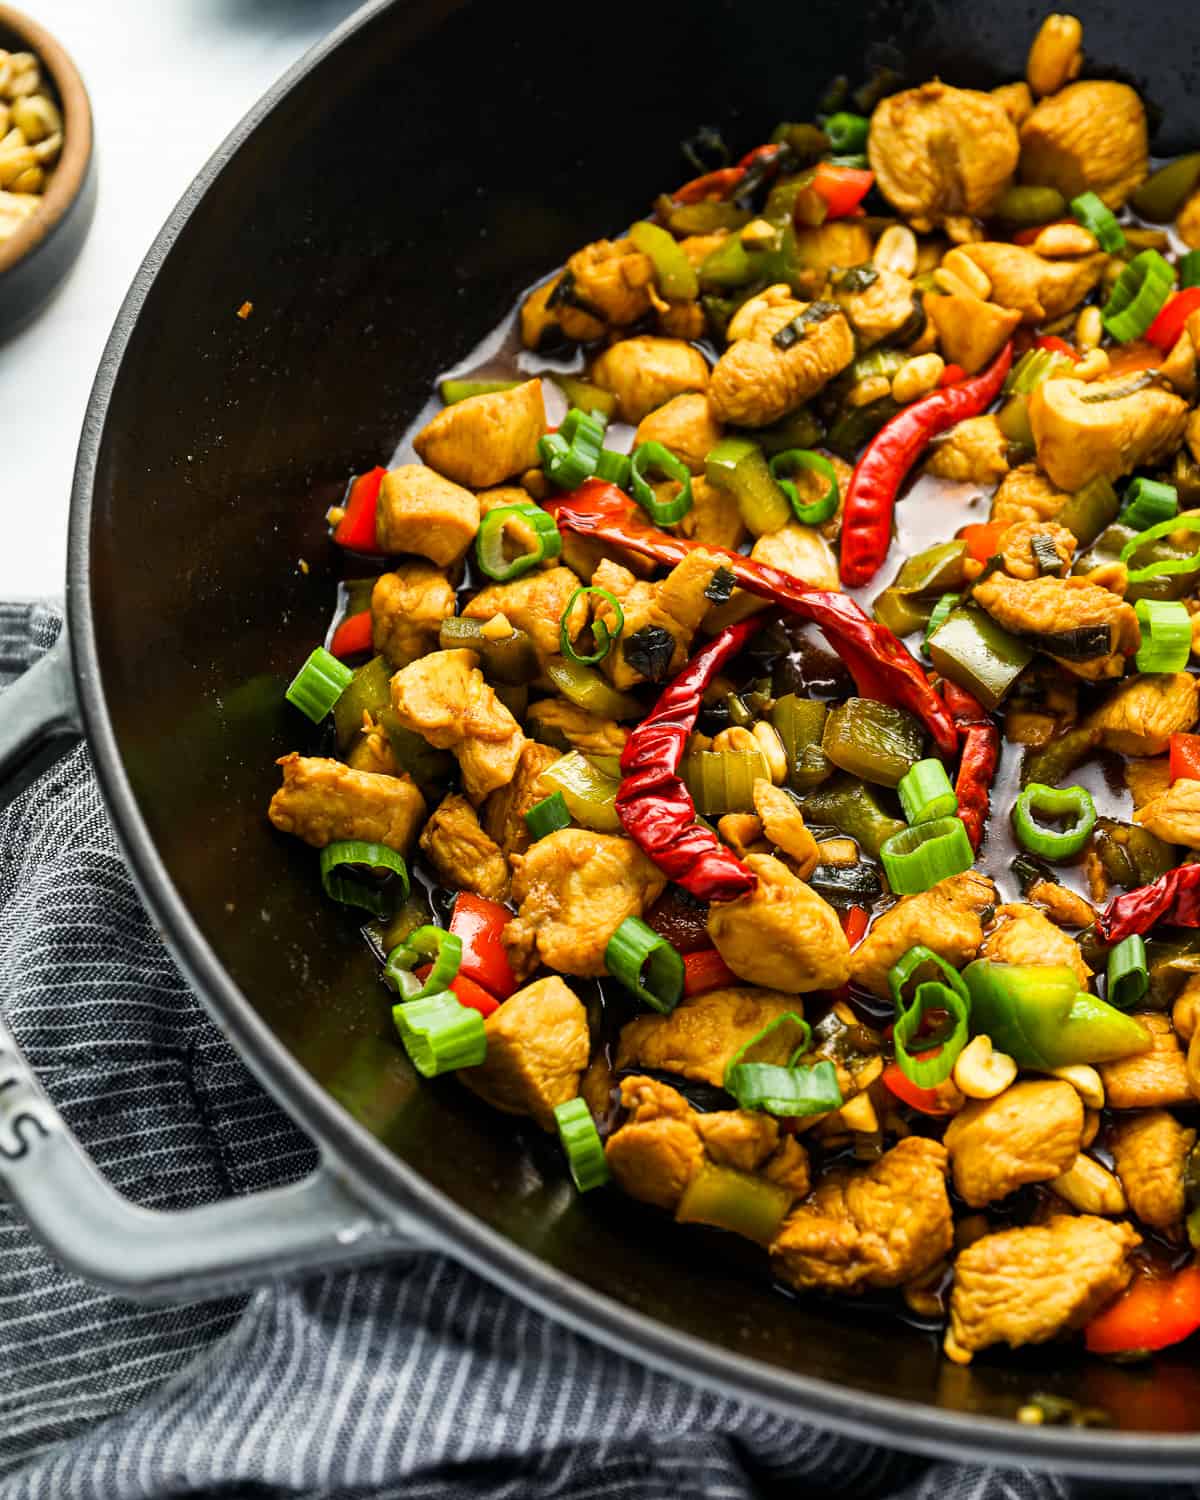 chicken and kung pao sauce in a skillet with vegetables.